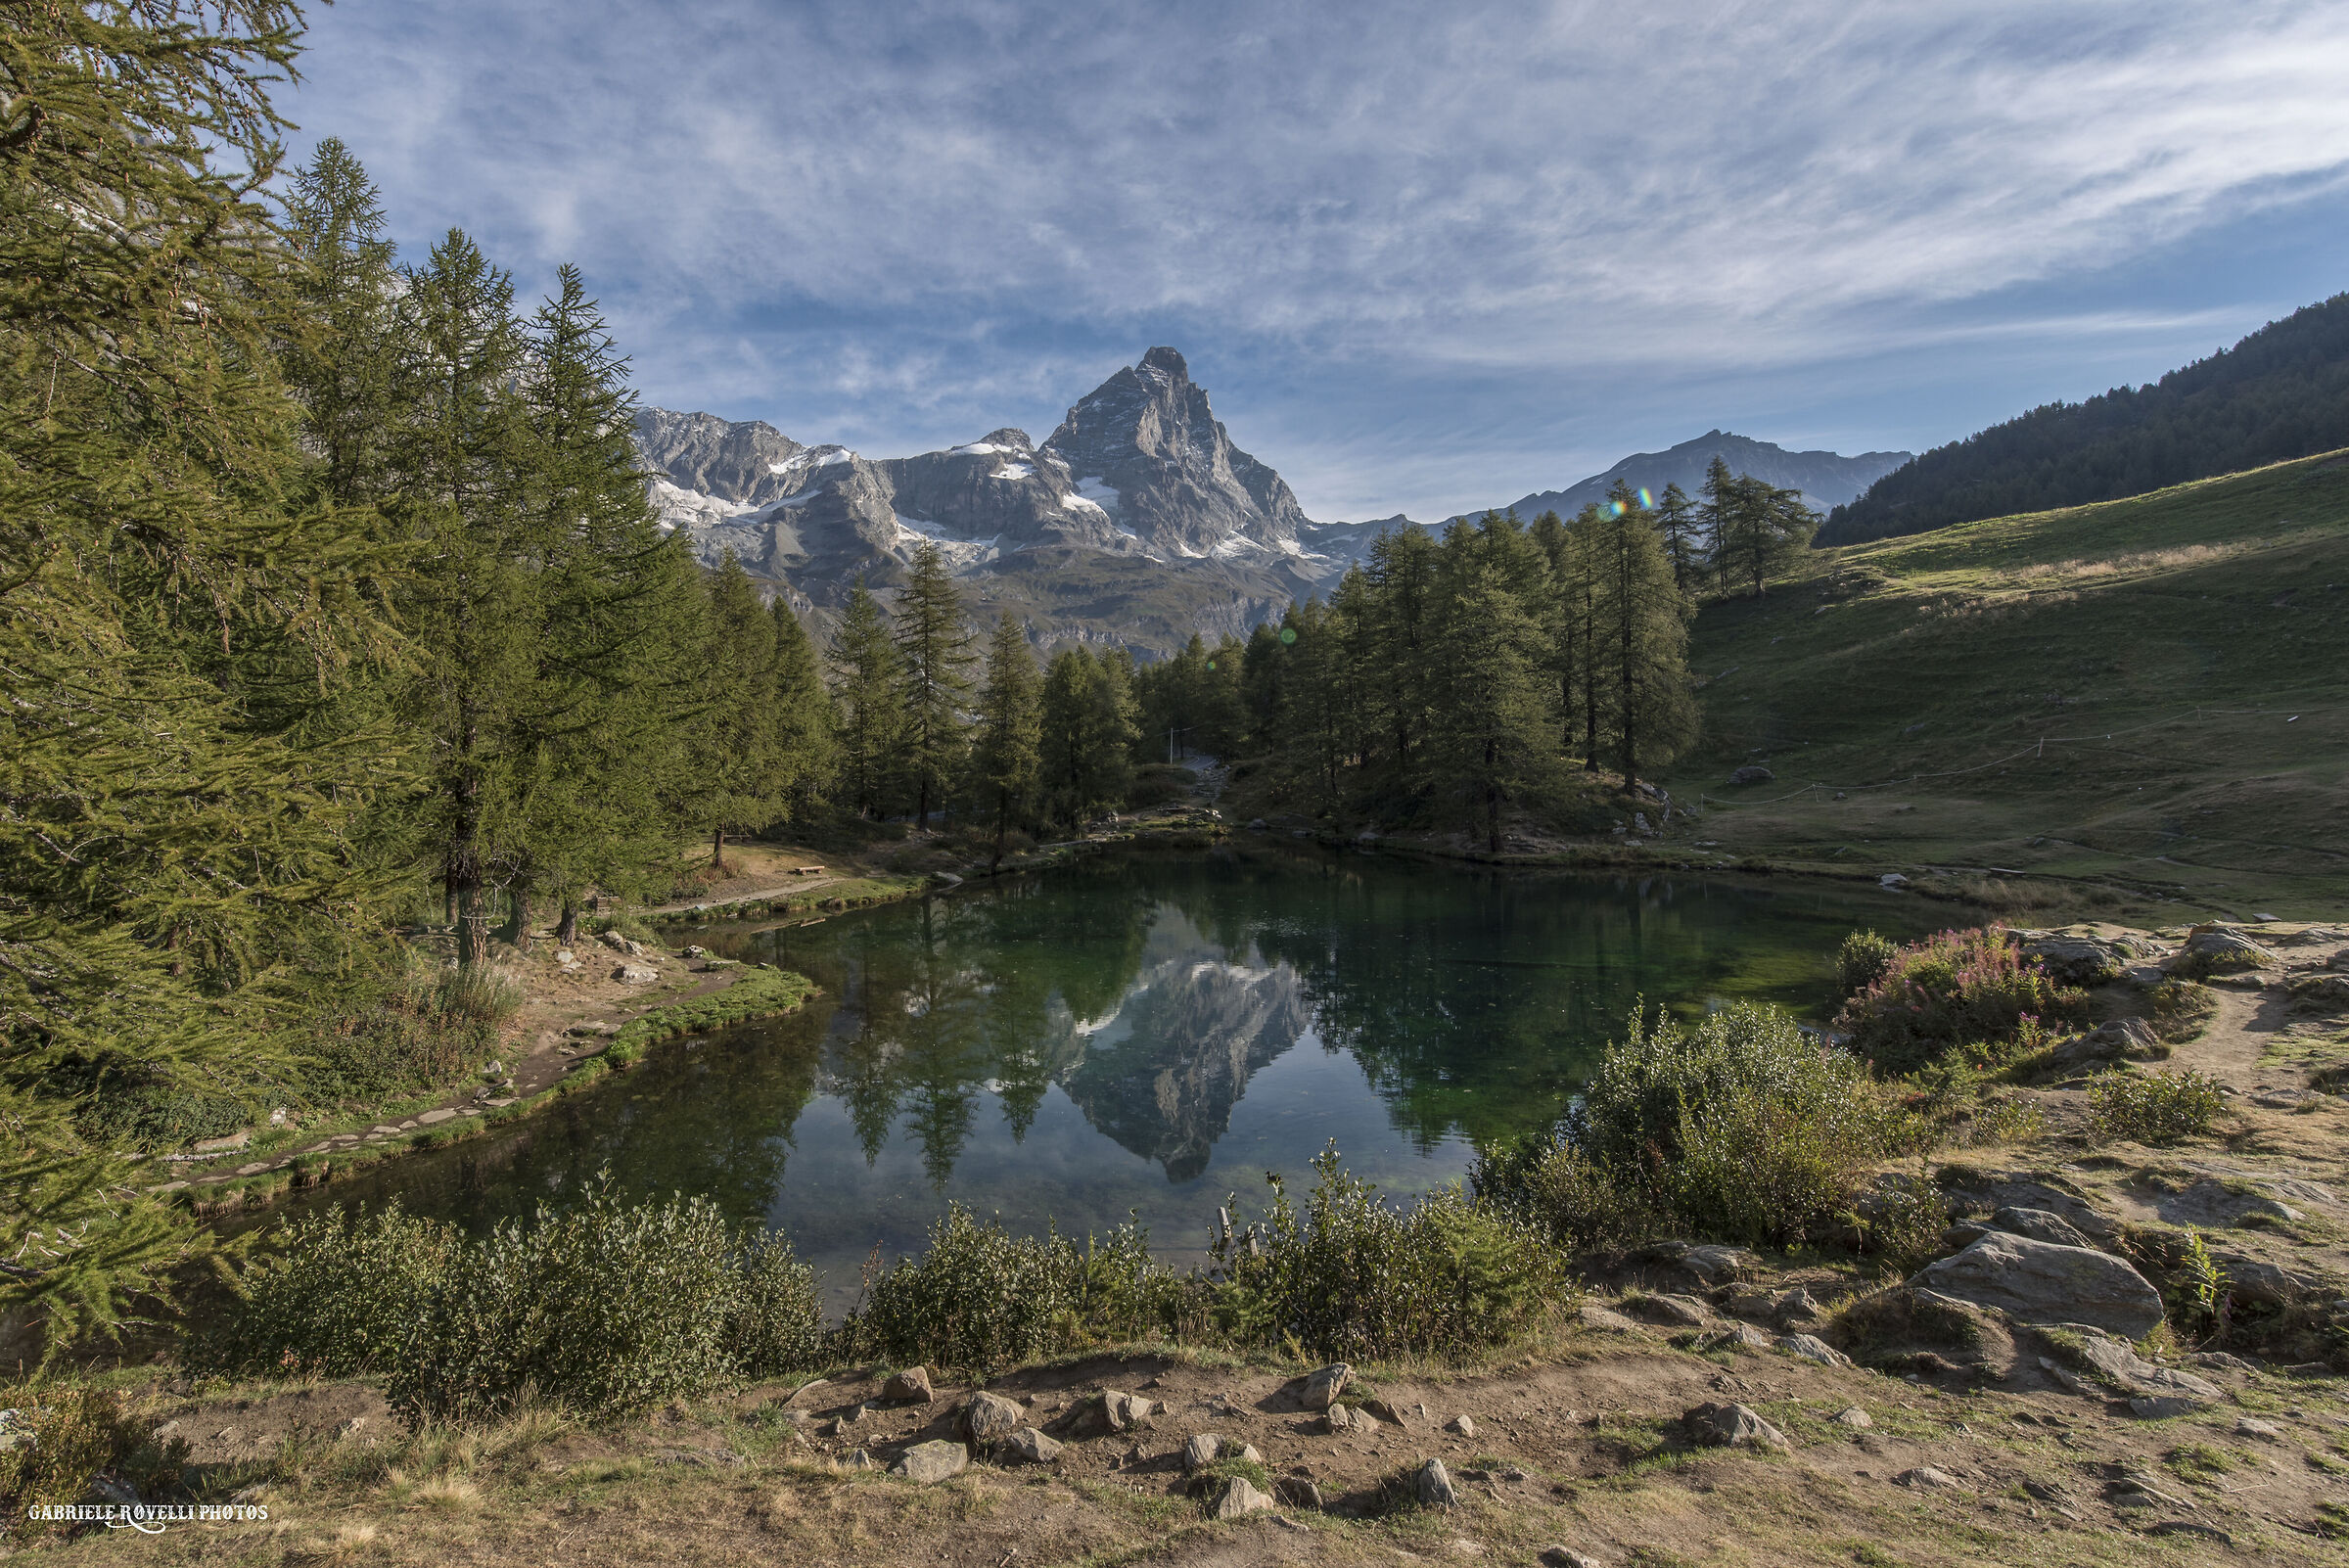 his majesty the Matterhorn that is reflected in the Blue Lake...